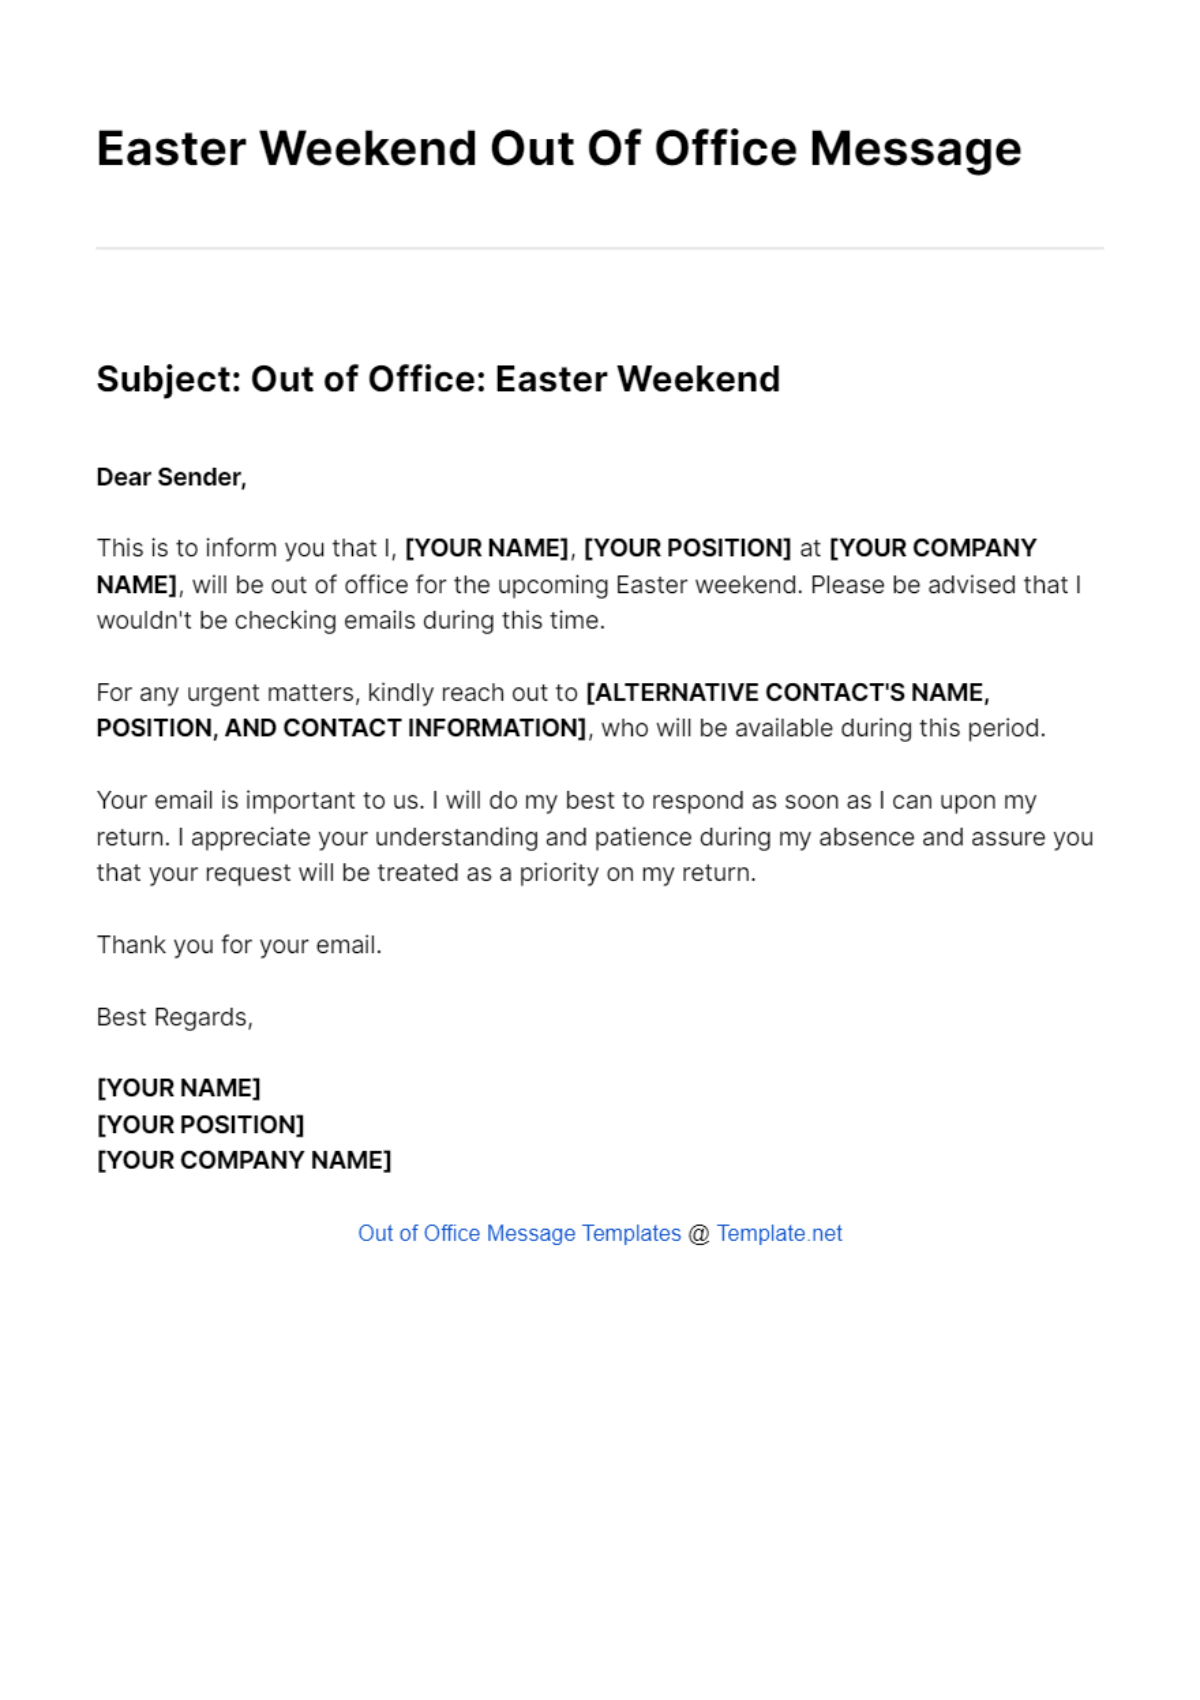 Easter Weekend Out Of Office Message Template